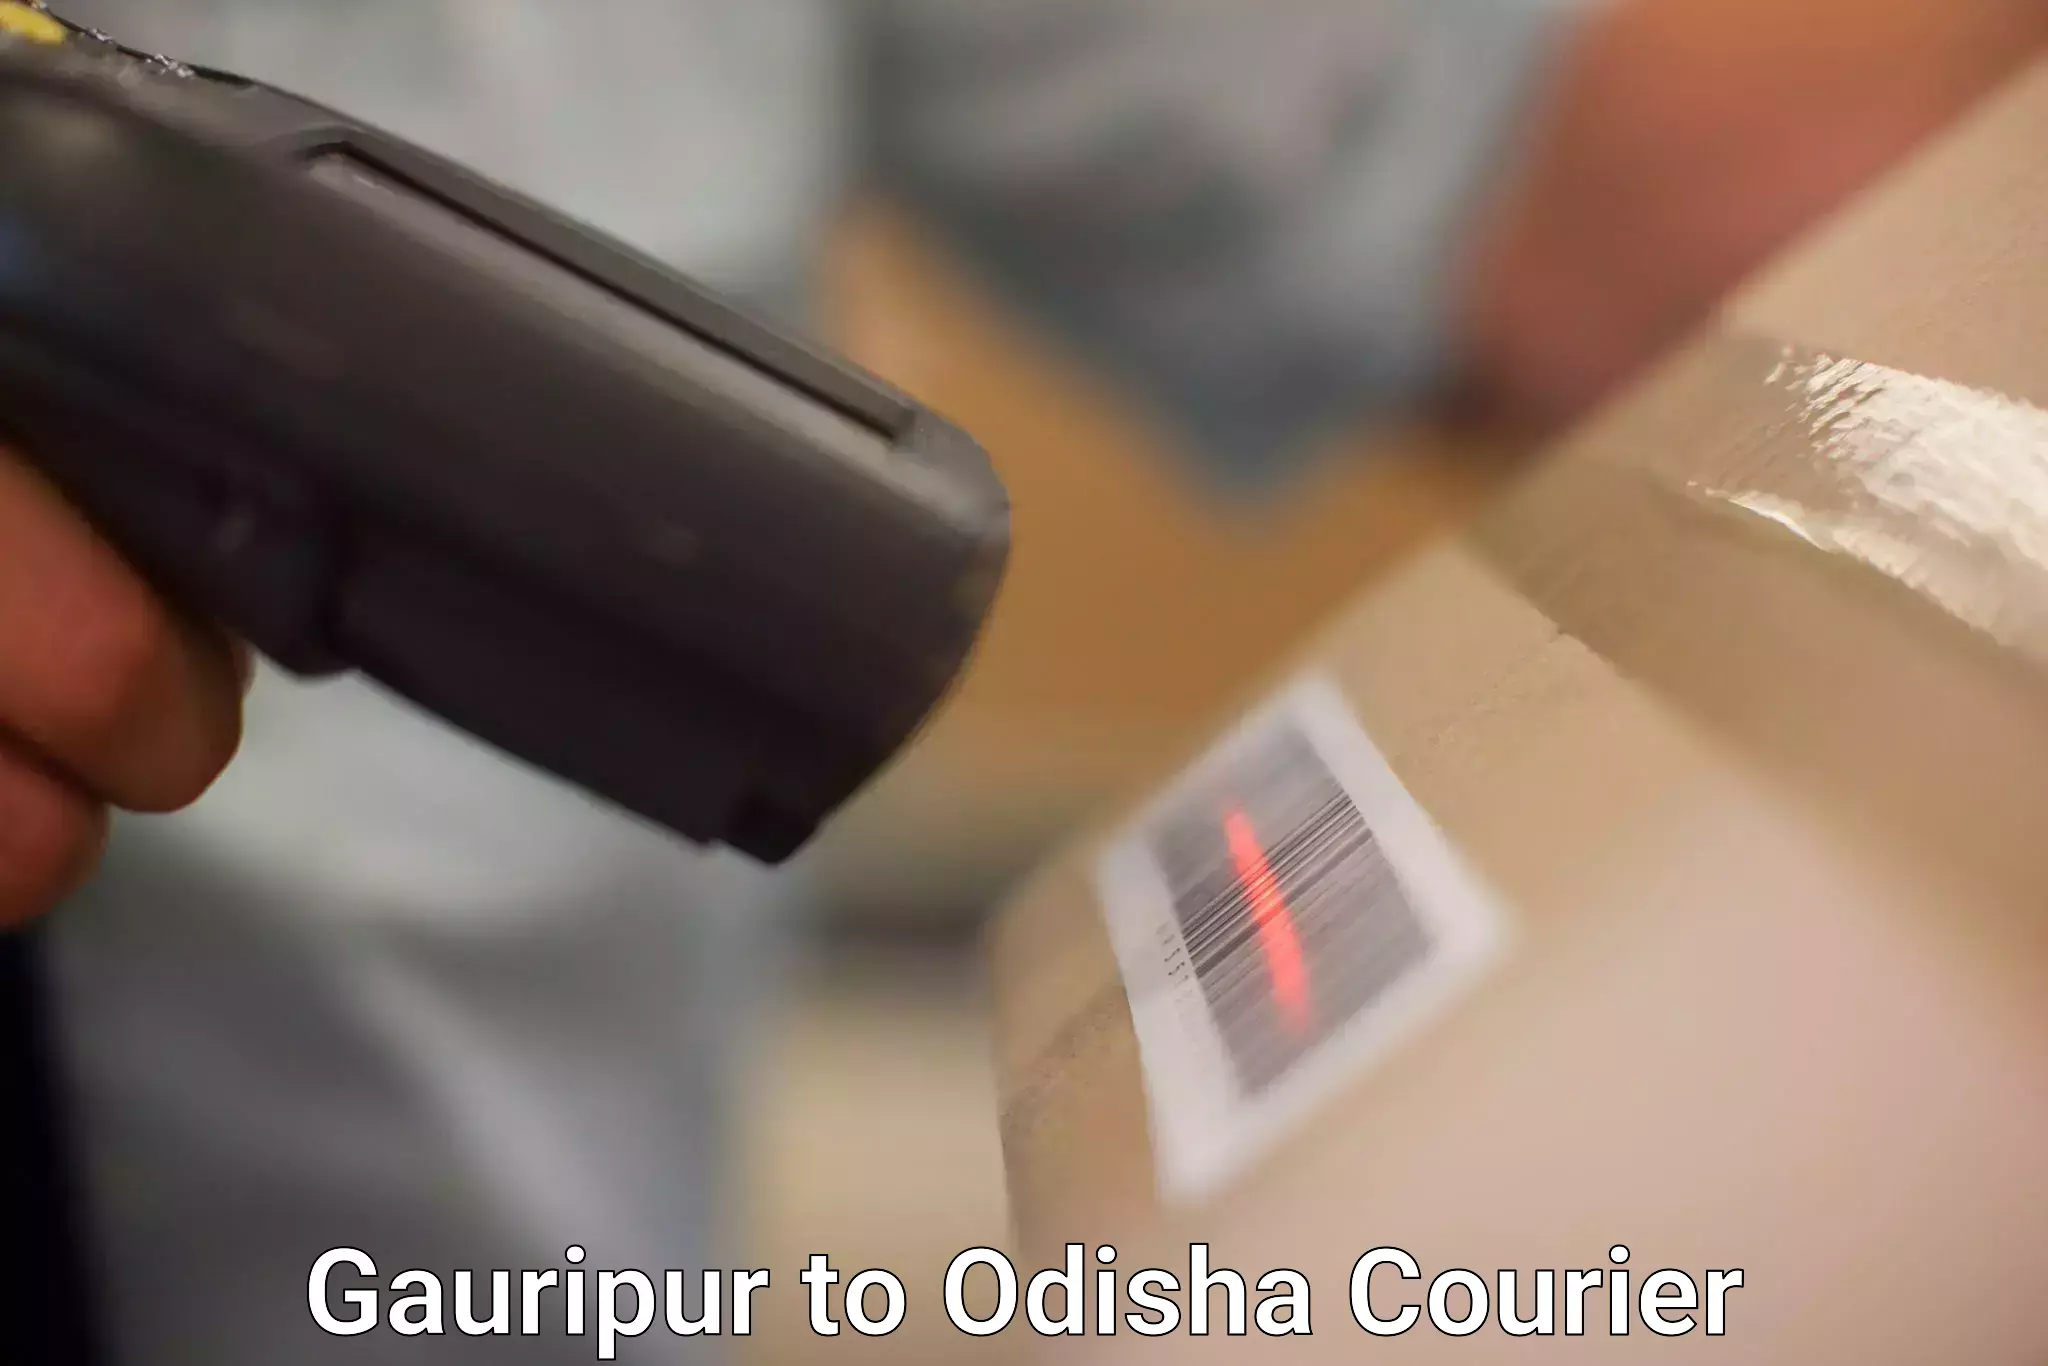 Advanced shipping technology Gauripur to Sankerko